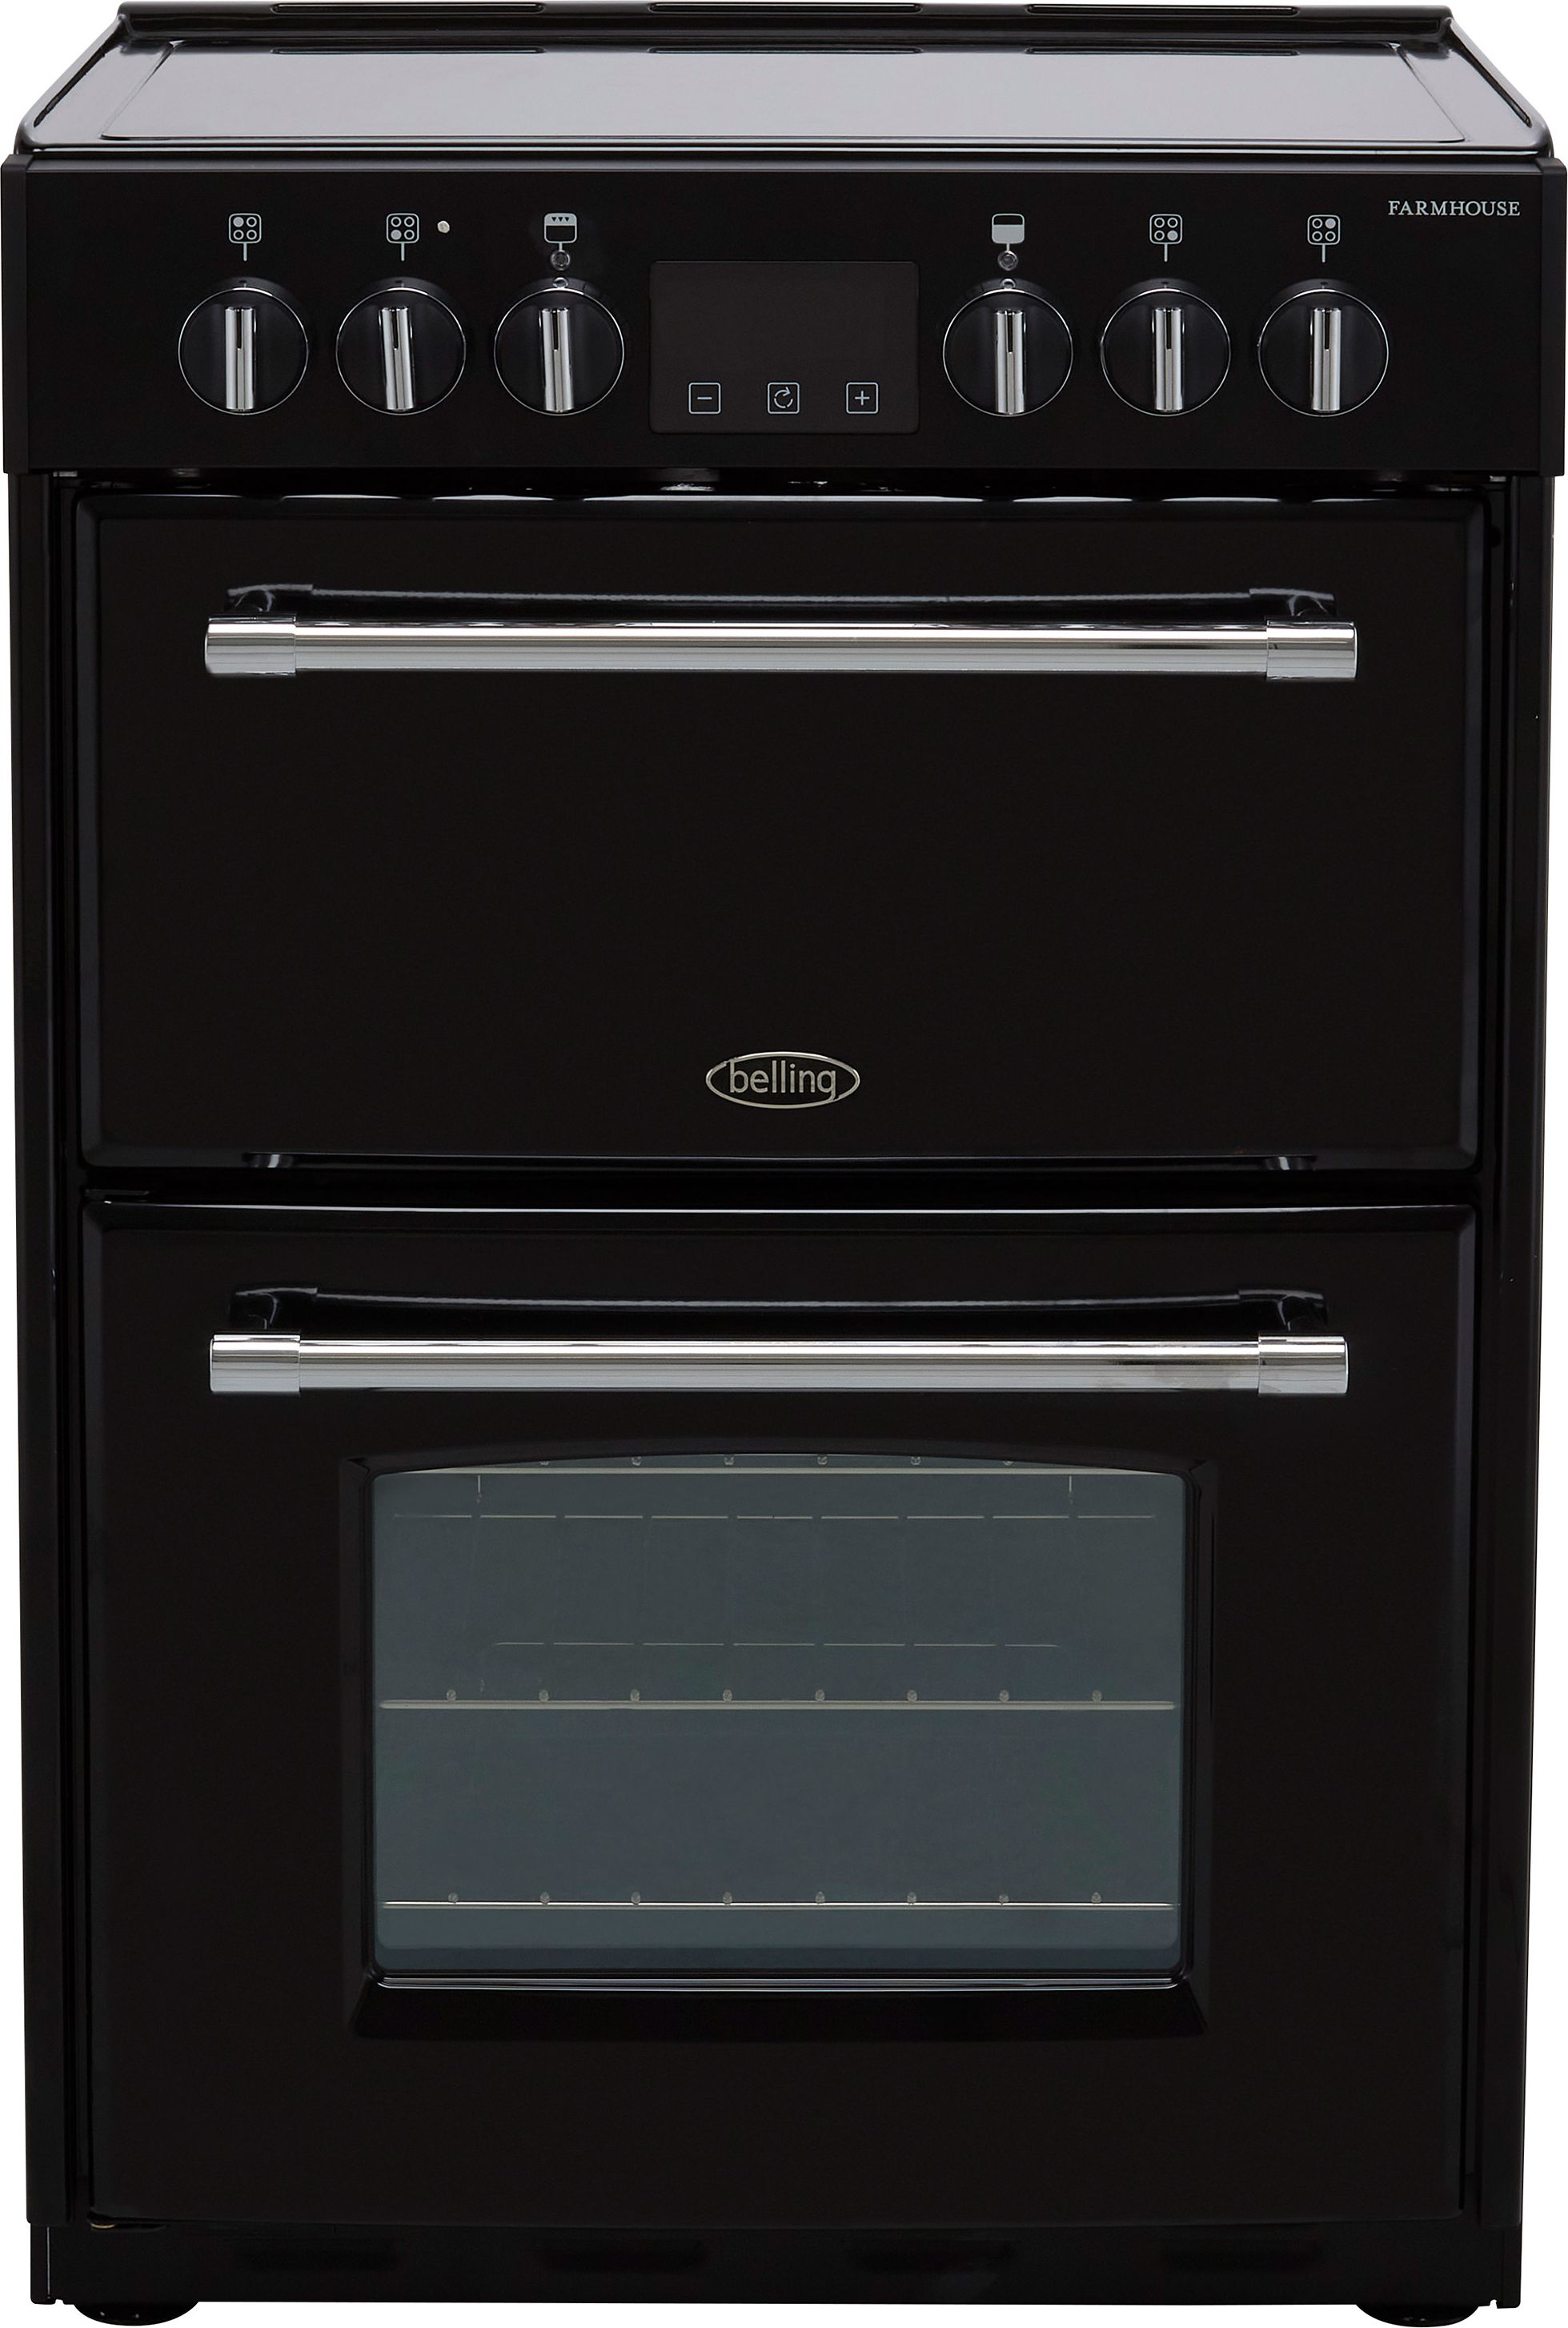 Belling Farmhouse60E 60cm Electric Cooker with Ceramic Hob - Black - A/A Rated, Black